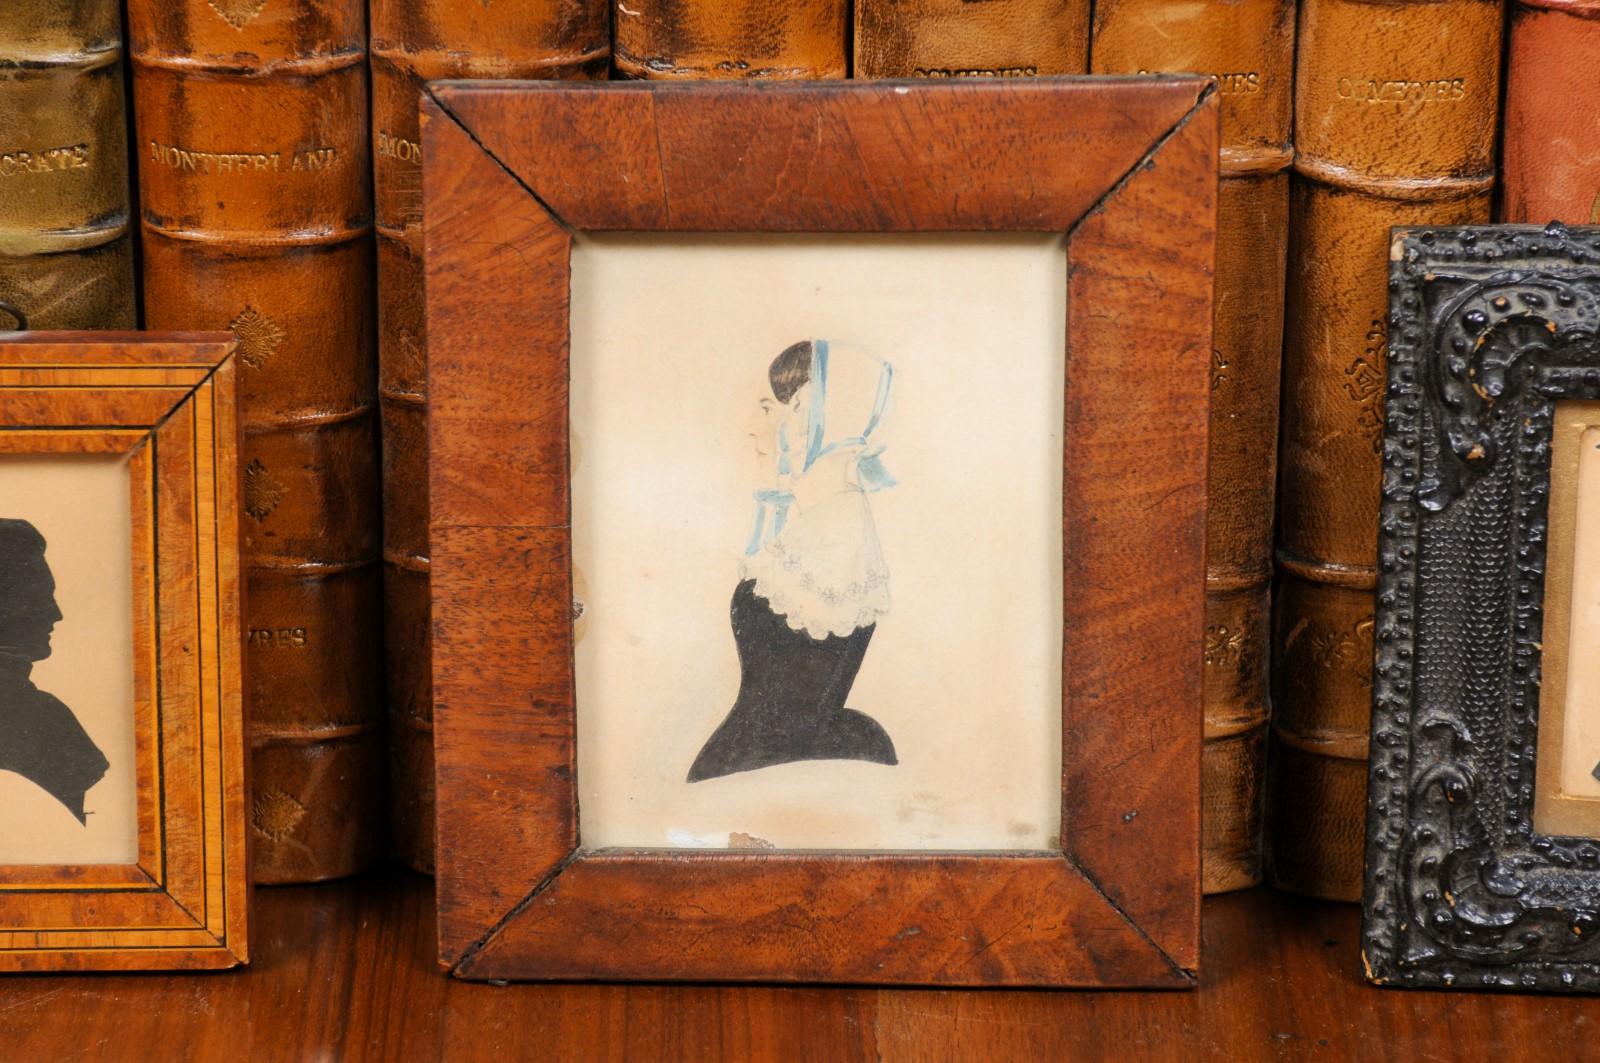 A set of three English Victorian period framed wooden silhouette miniatures from the 19th century, depicting a woman, a poet and a musician. Created in England during the Victorian era, this set of three framed miniatures features lady depicted in